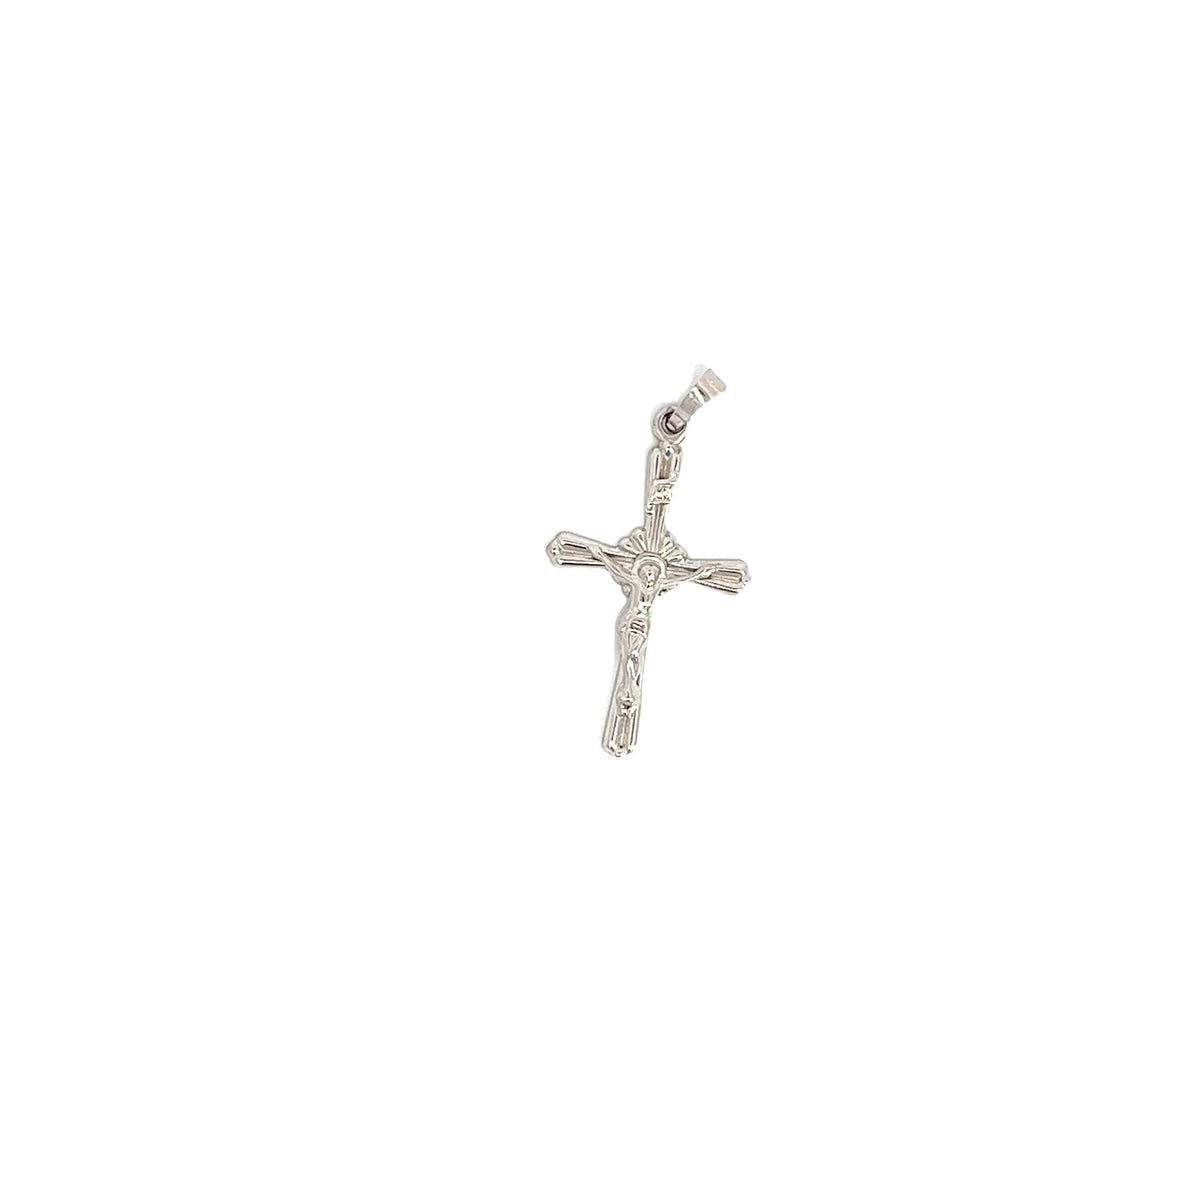 Baby 14k white gold Polished cross necklace